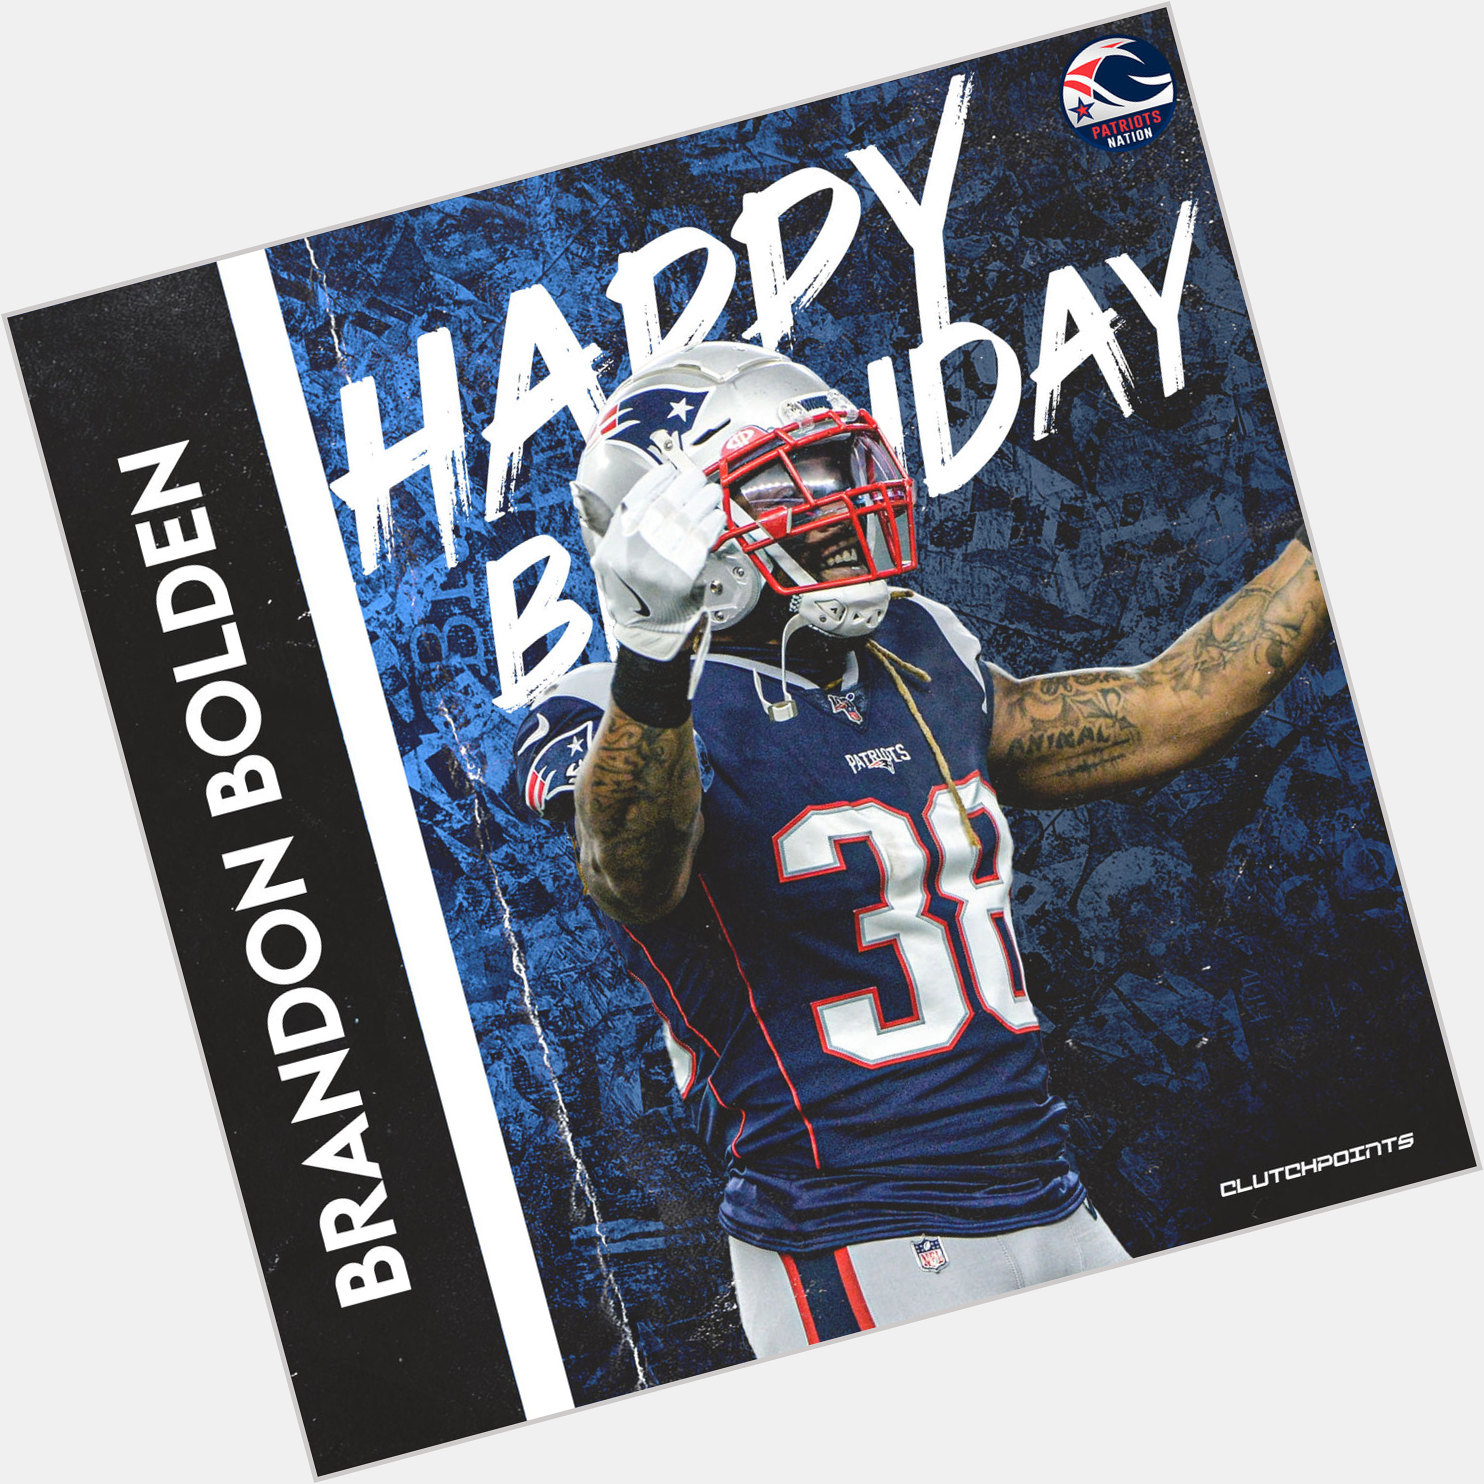 Join Patriots Nation as we greet Brandon Bolden a happy 32nd birthday! 